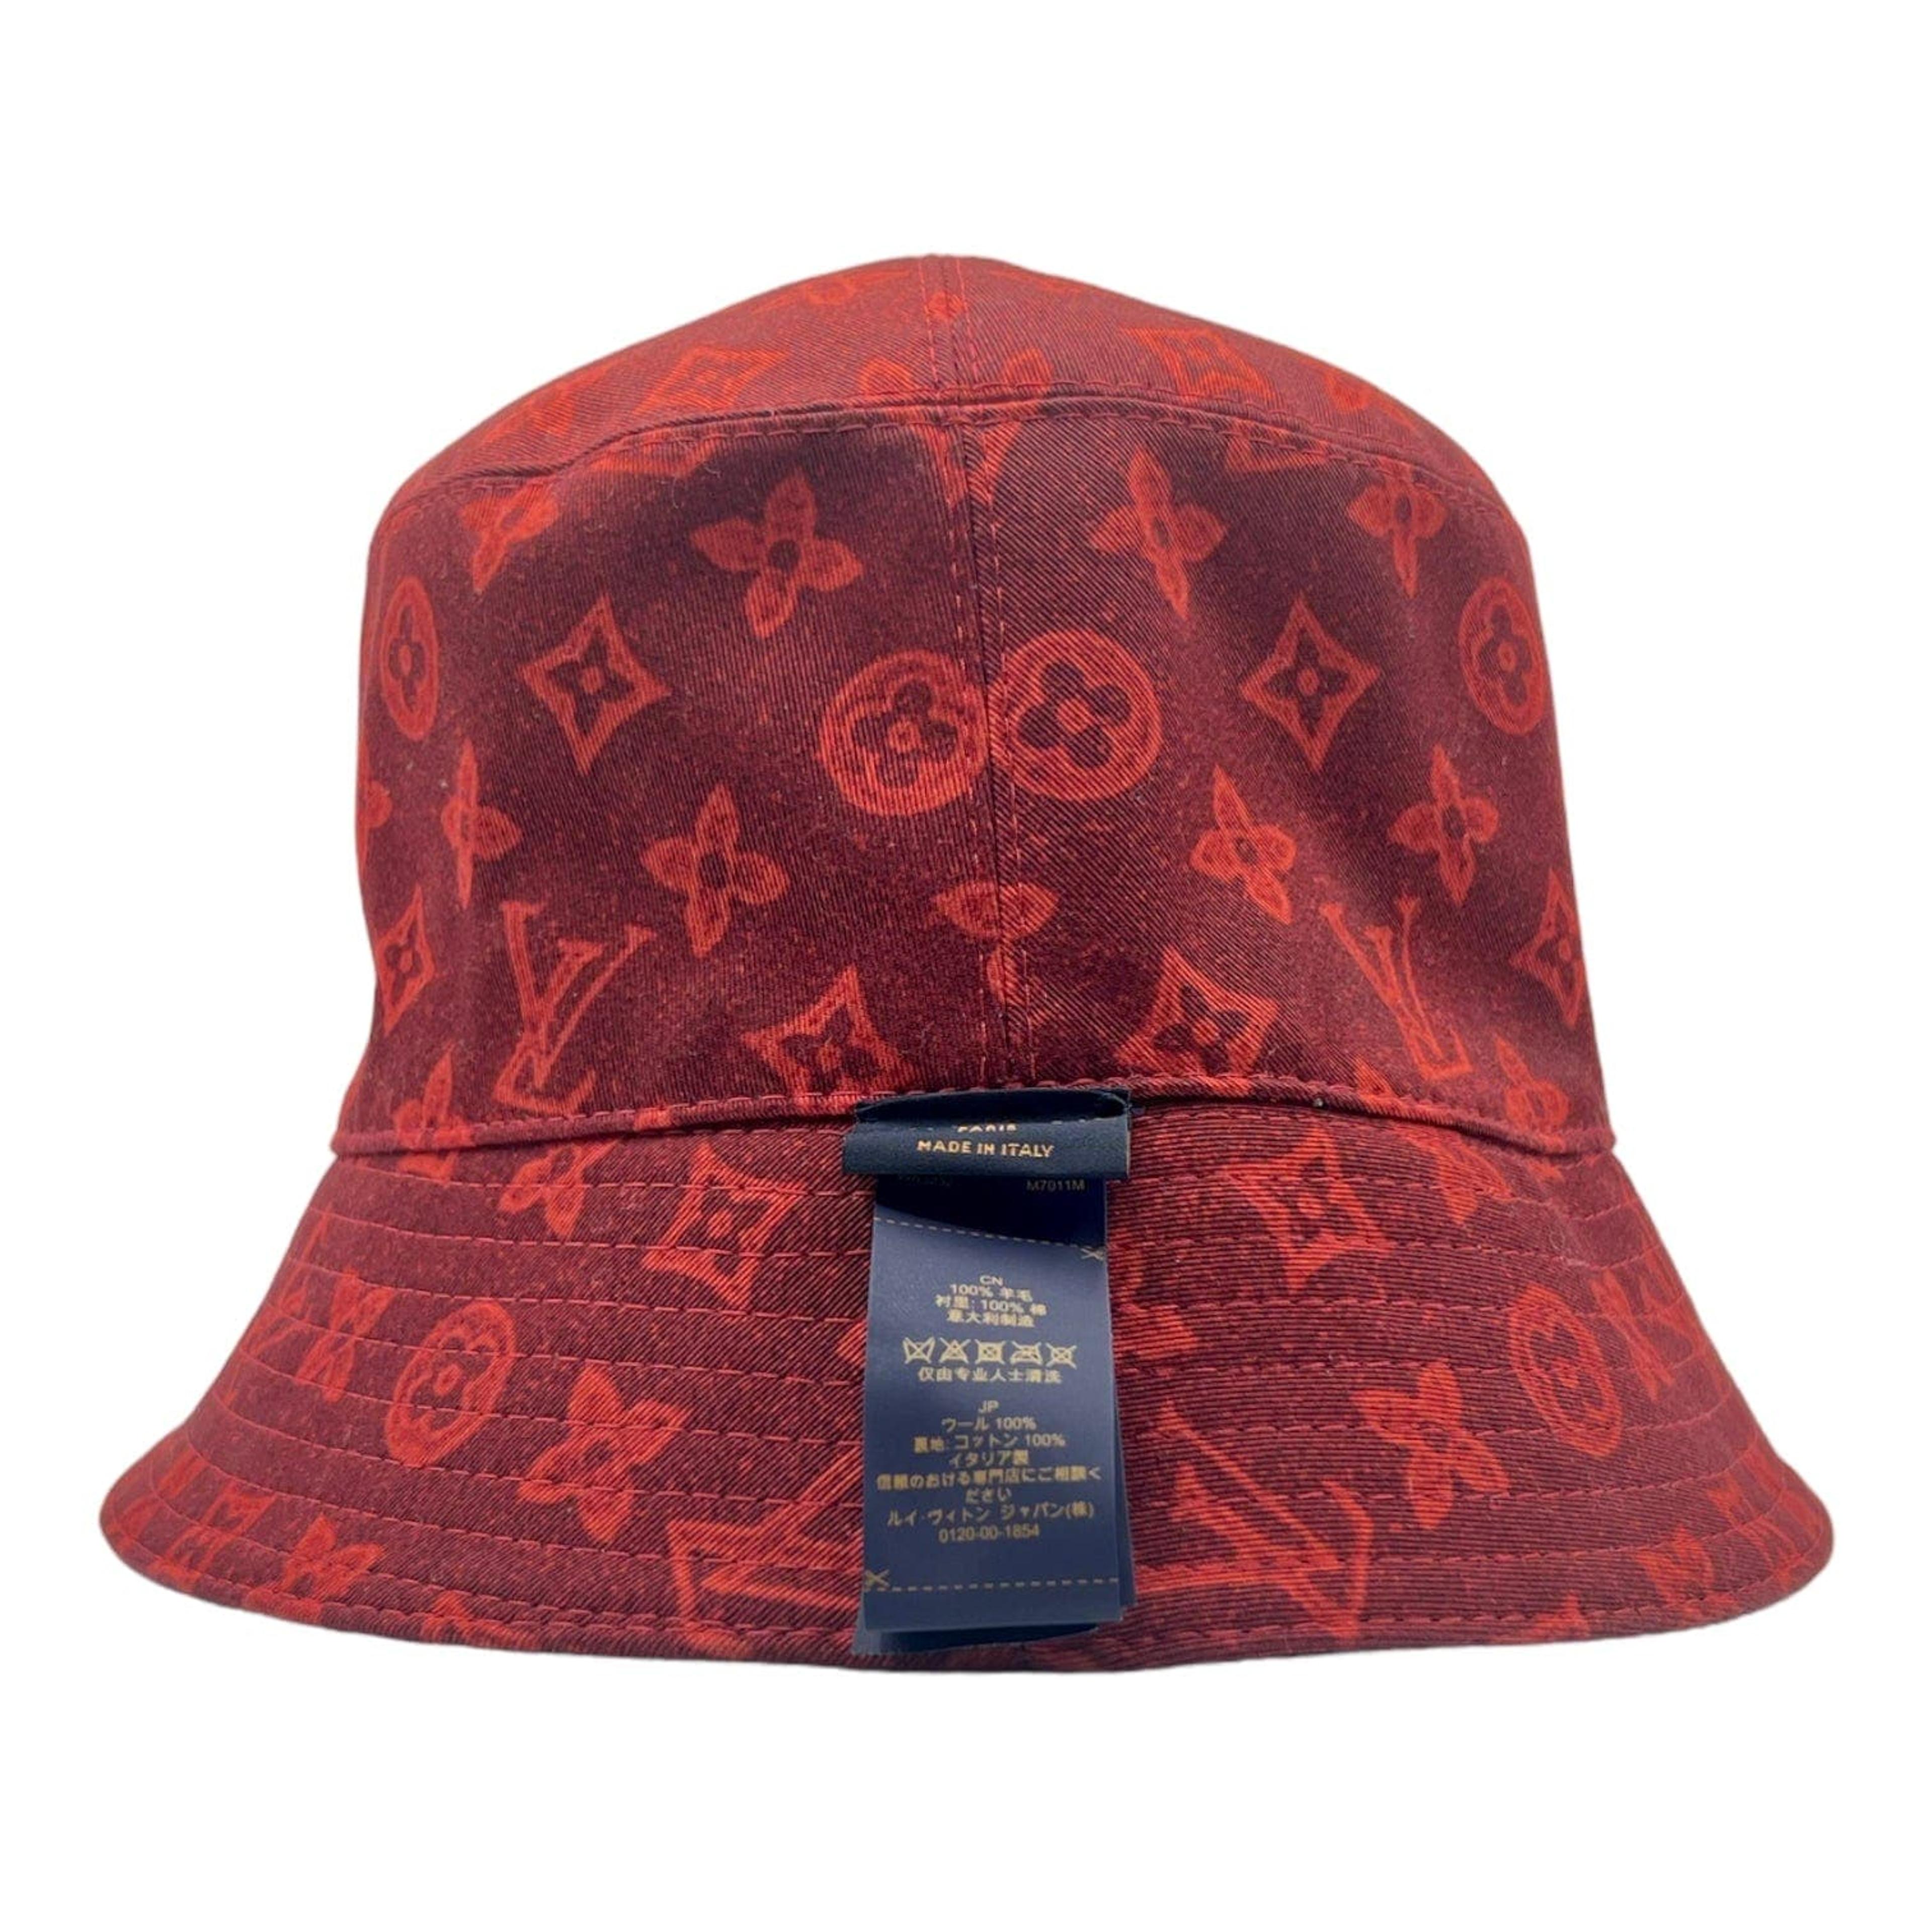 Alternate View 1 of Louis Vuitton Monogram Record Bucket Hat Red Navy Pre-Owned